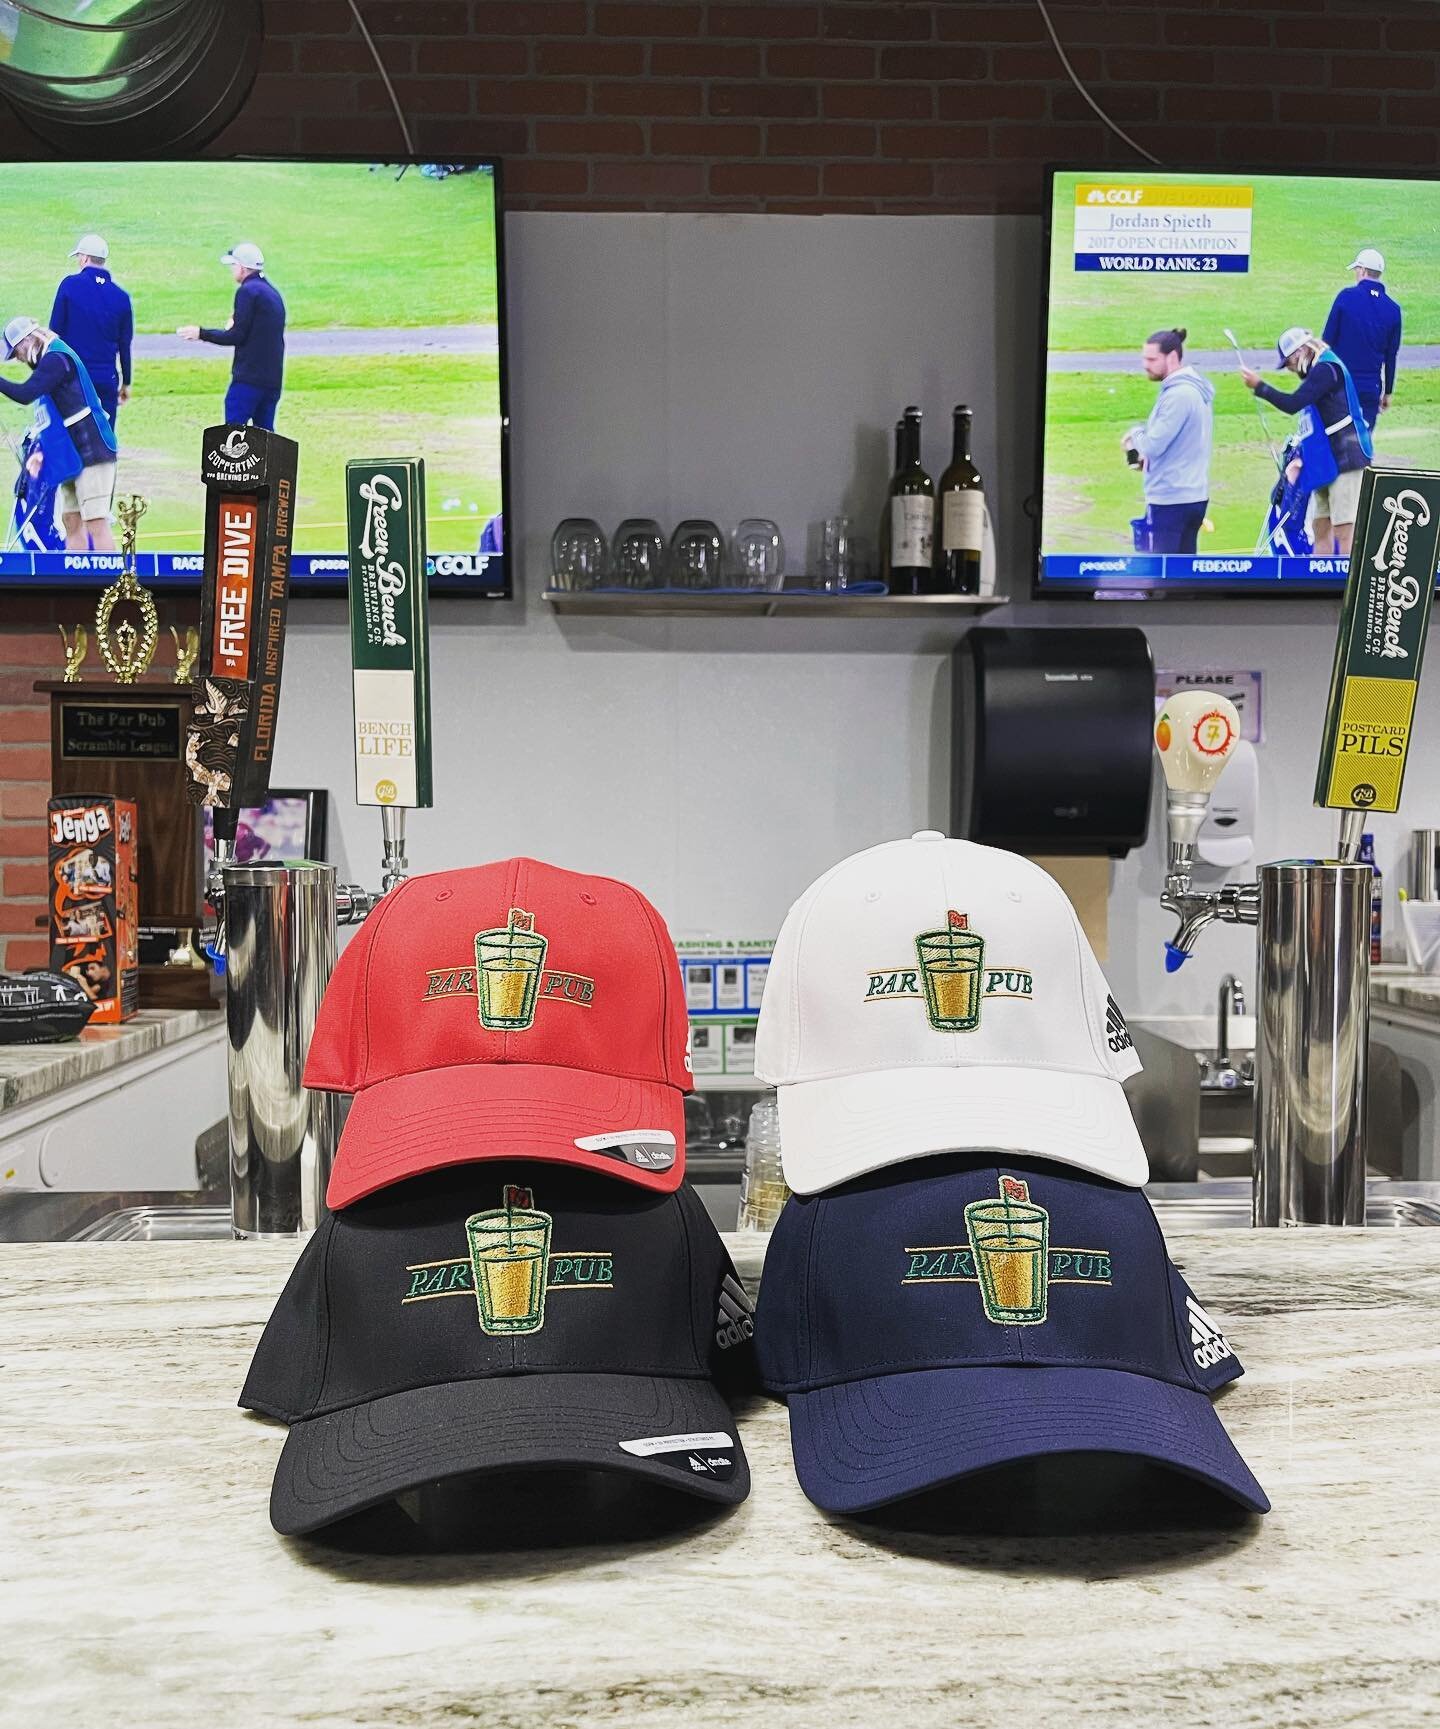 New Hats in Stock and New Beers on Tap! Come on in and Grab one of each! 
-
-
-
#golf #golfsimulator #bar #beer #craftbeer #wine #food #indoorgolf #parpub #pebblebeach #par3 #golfstagram #golfing #golflife #pinellas #tampa #tampabay #stpete #largo #c